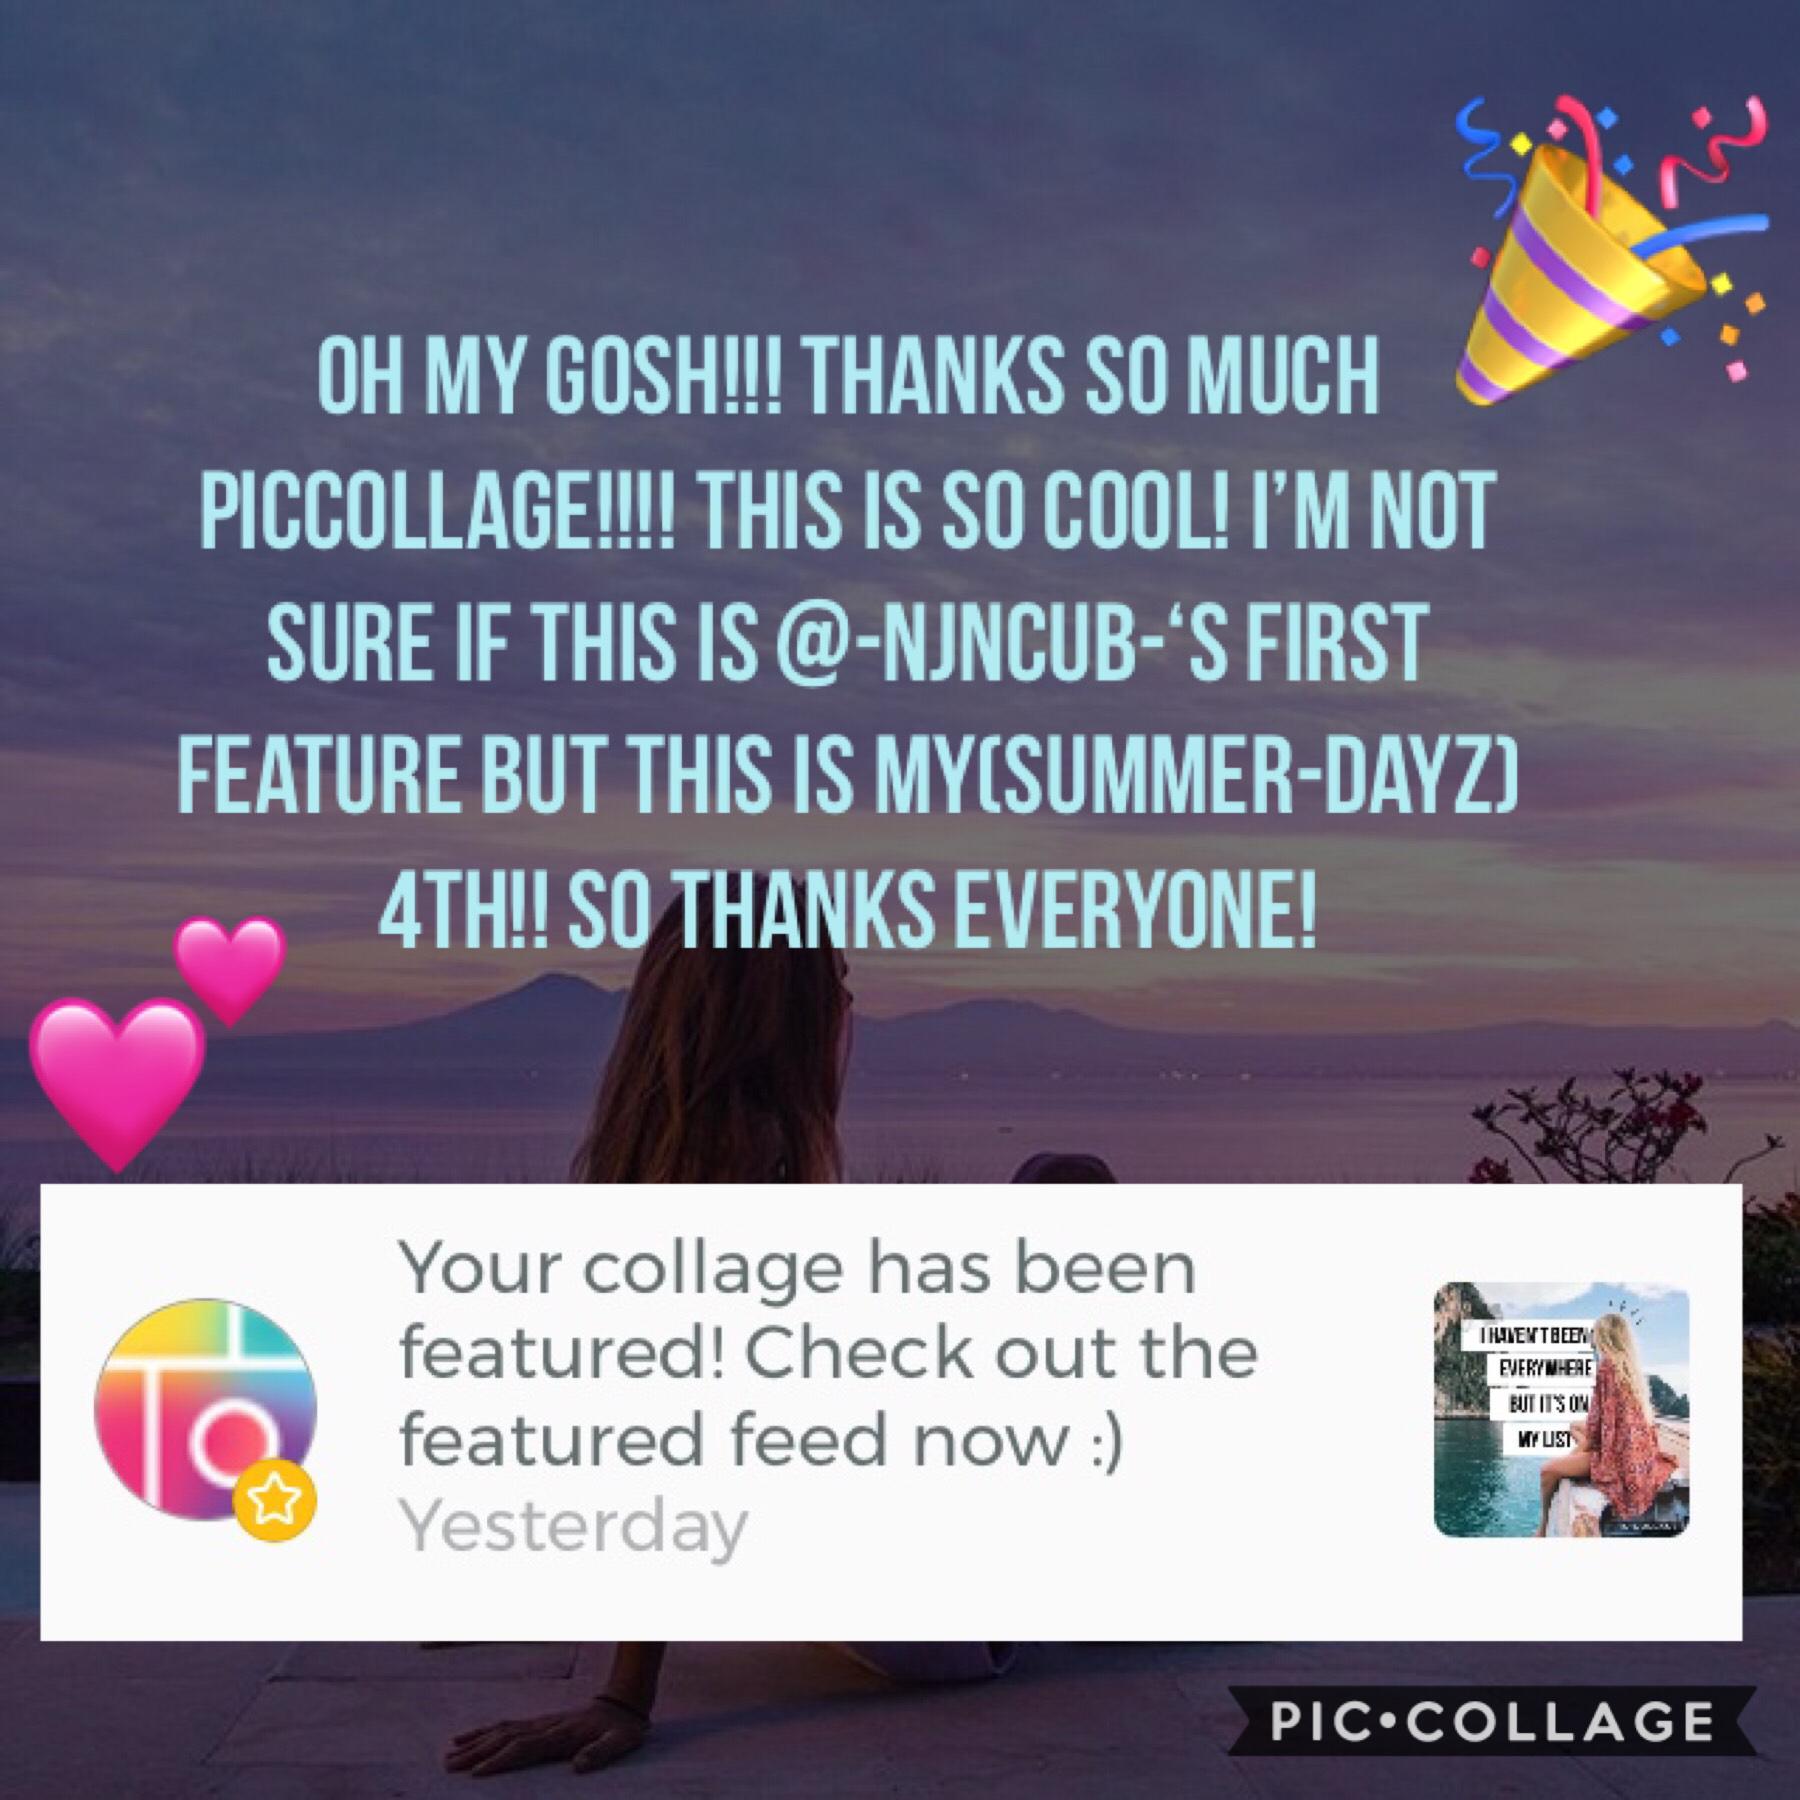 Thanks PicCollage!! This is amazing!! I’m sure NJNcub will be excited!!